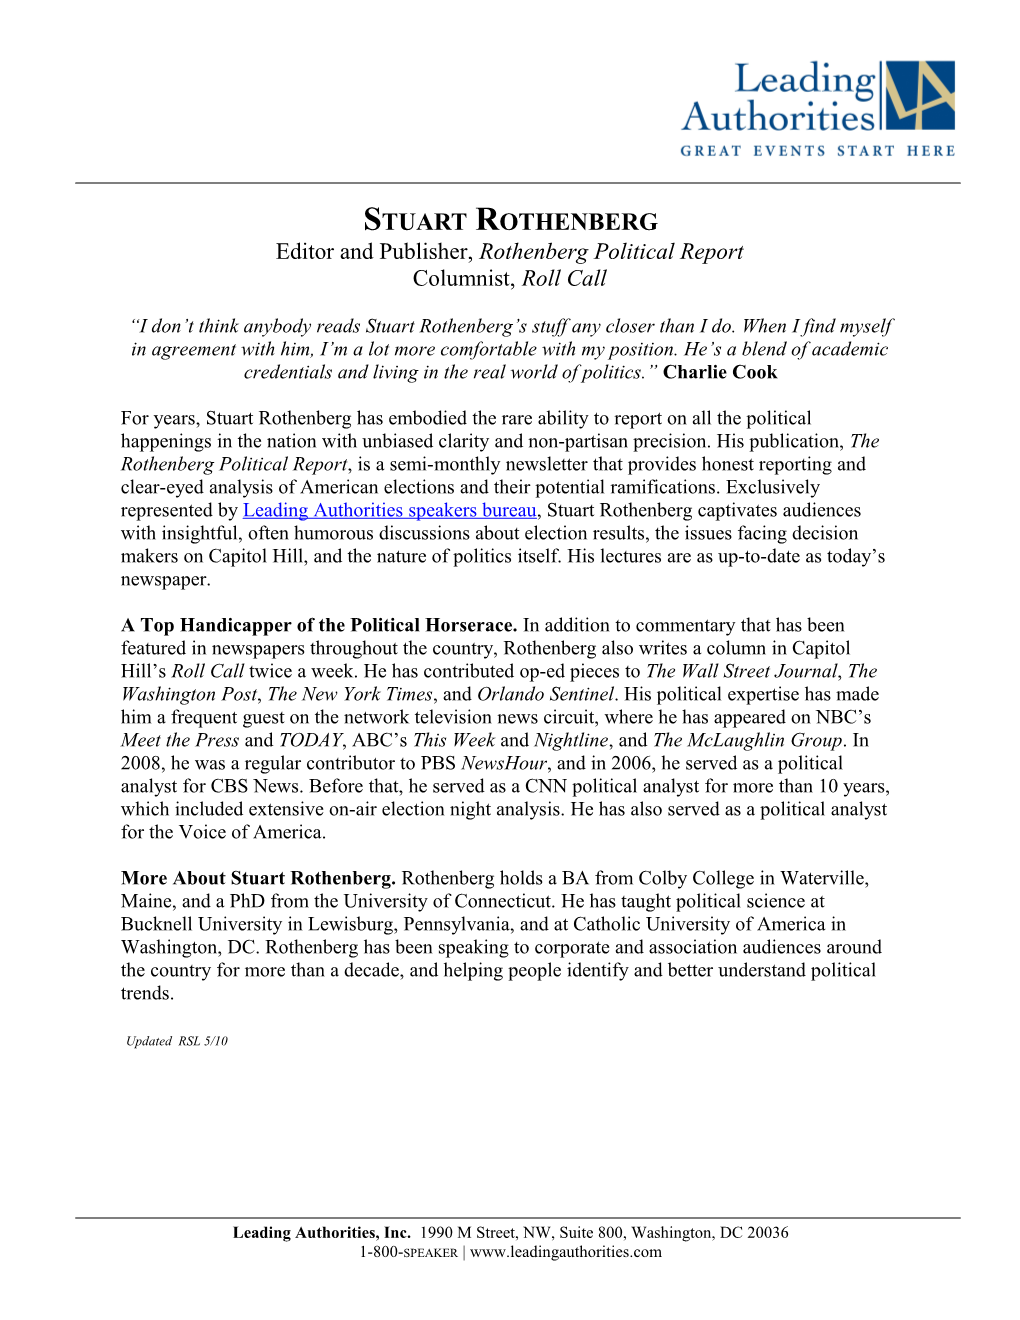 Editor and Publisher, Rothenberg Political Report